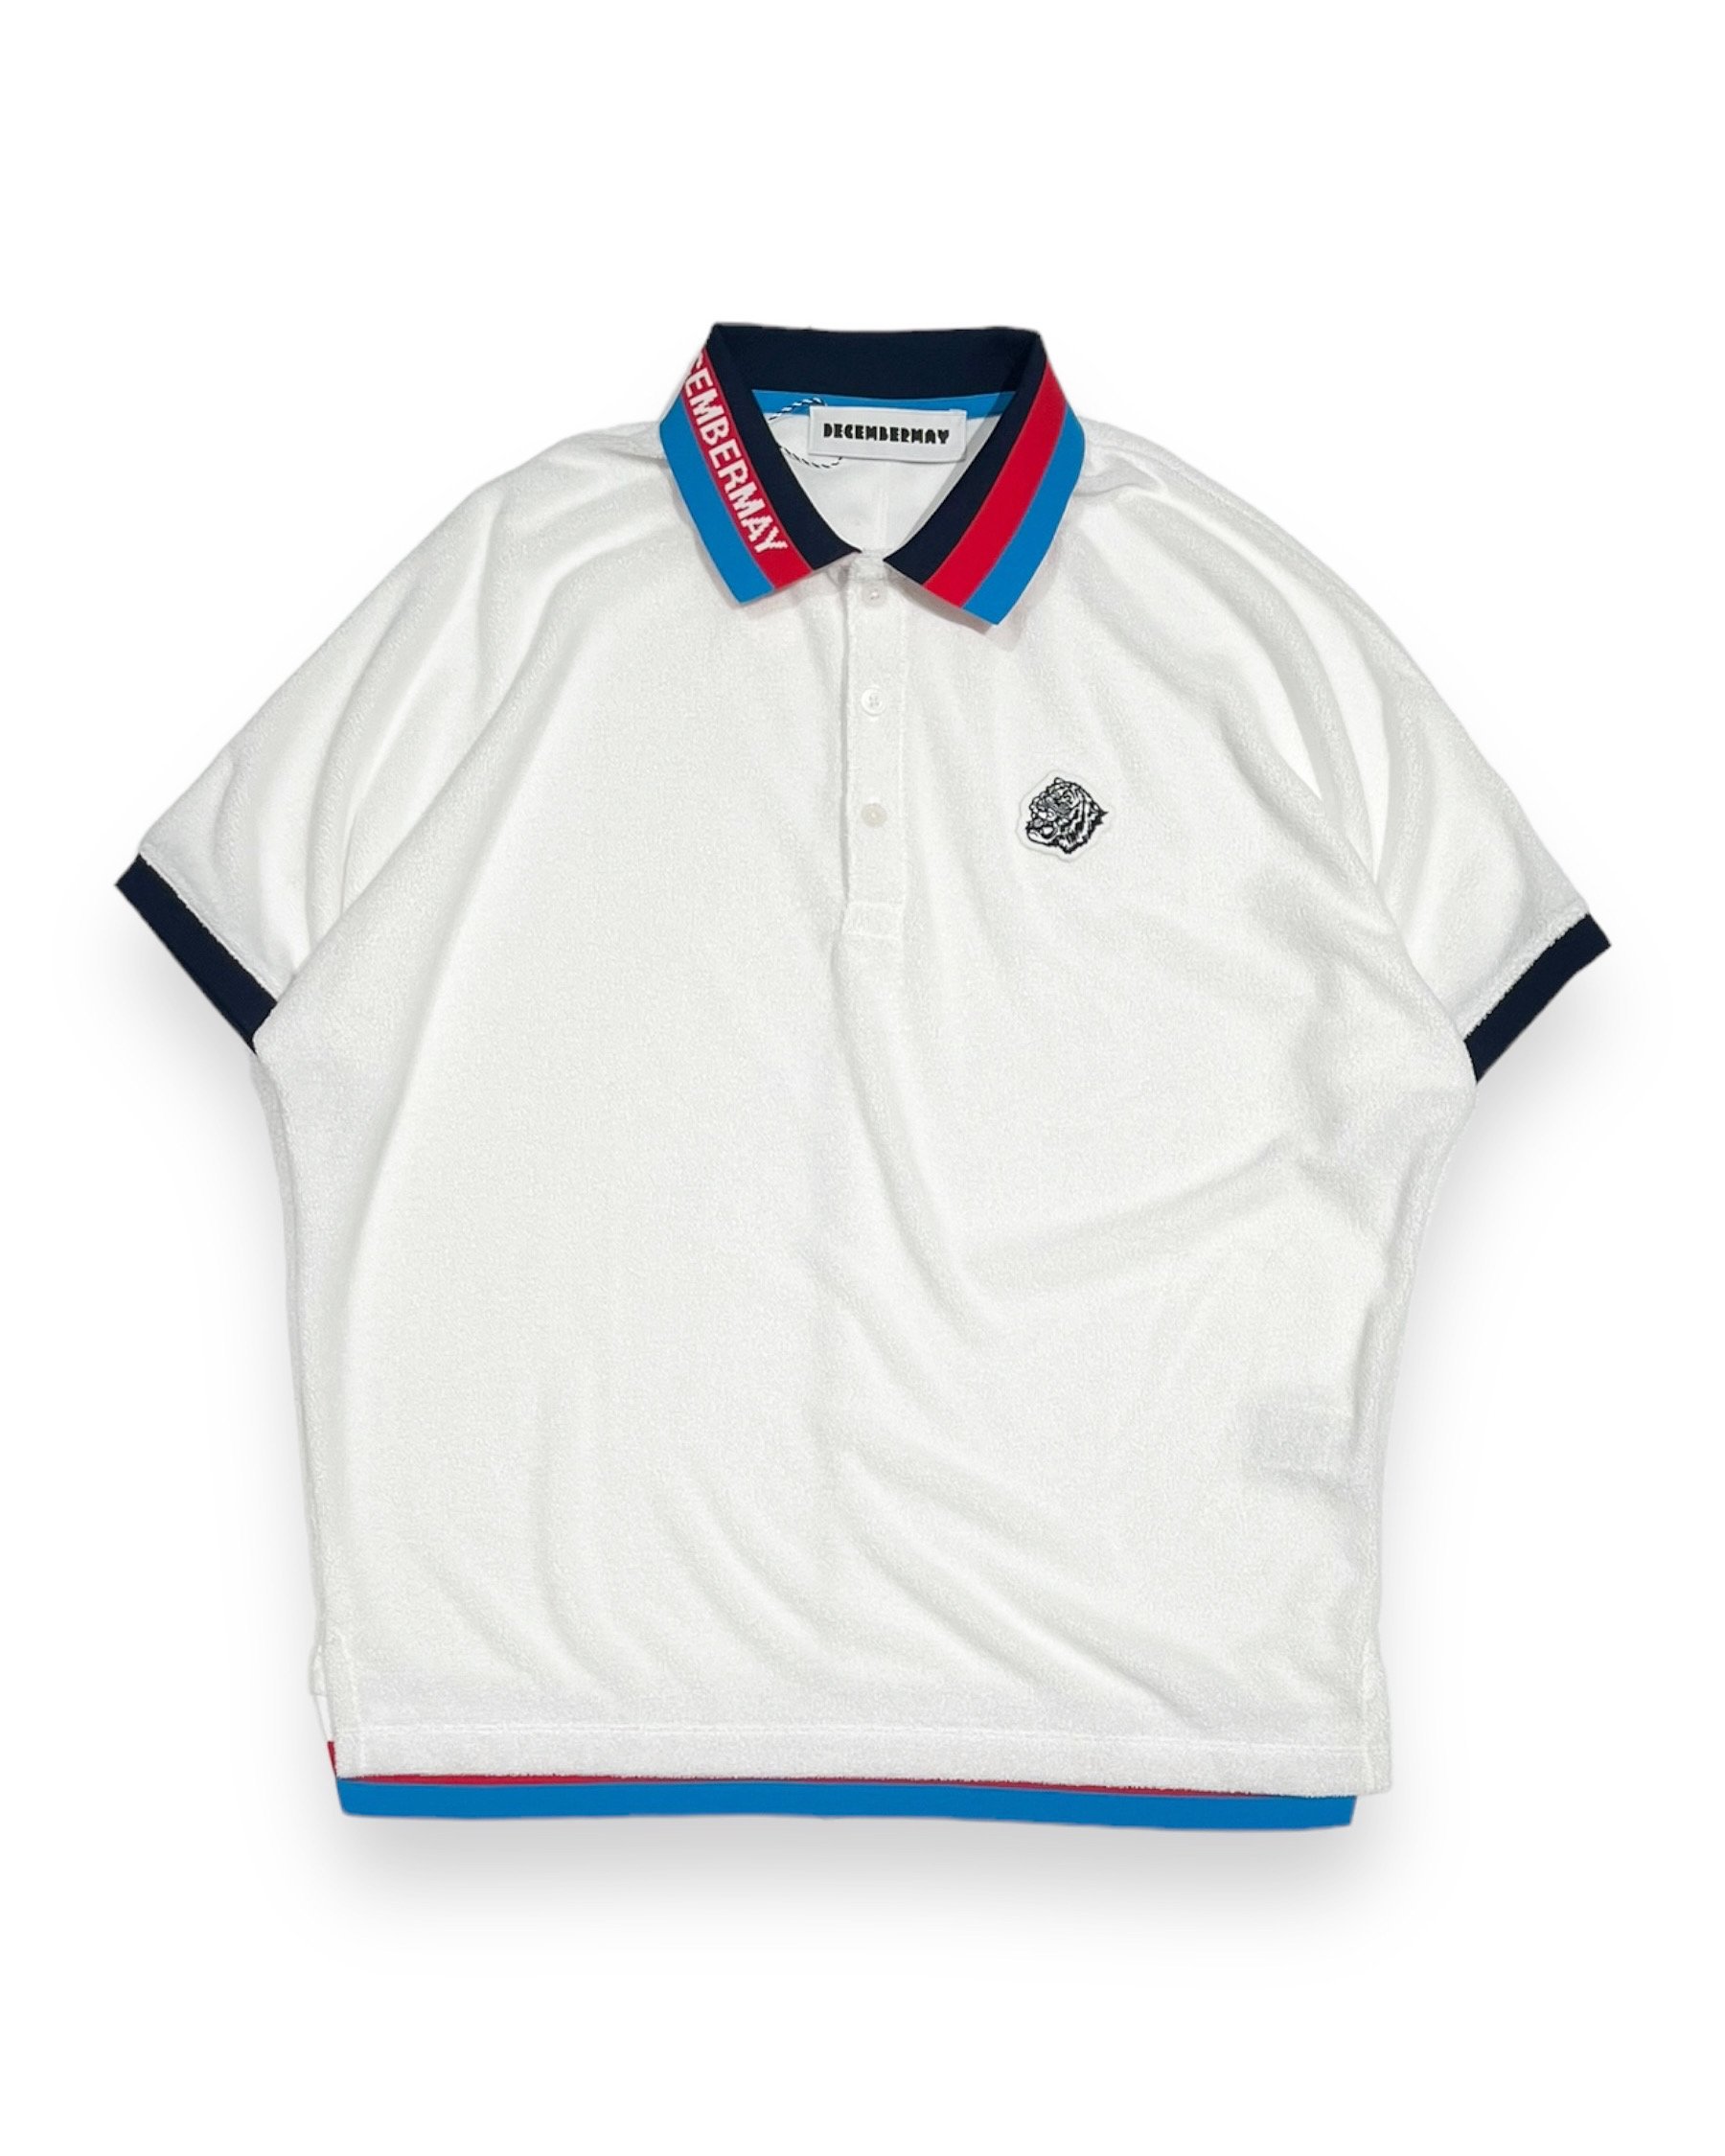 <img class='new_mark_img1' src='https://img.shop-pro.jp/img/new/icons5.gif' style='border:none;display:inline;margin:0px;padding:0px;width:auto;' />Pile Dolman sleeve polo / MEN